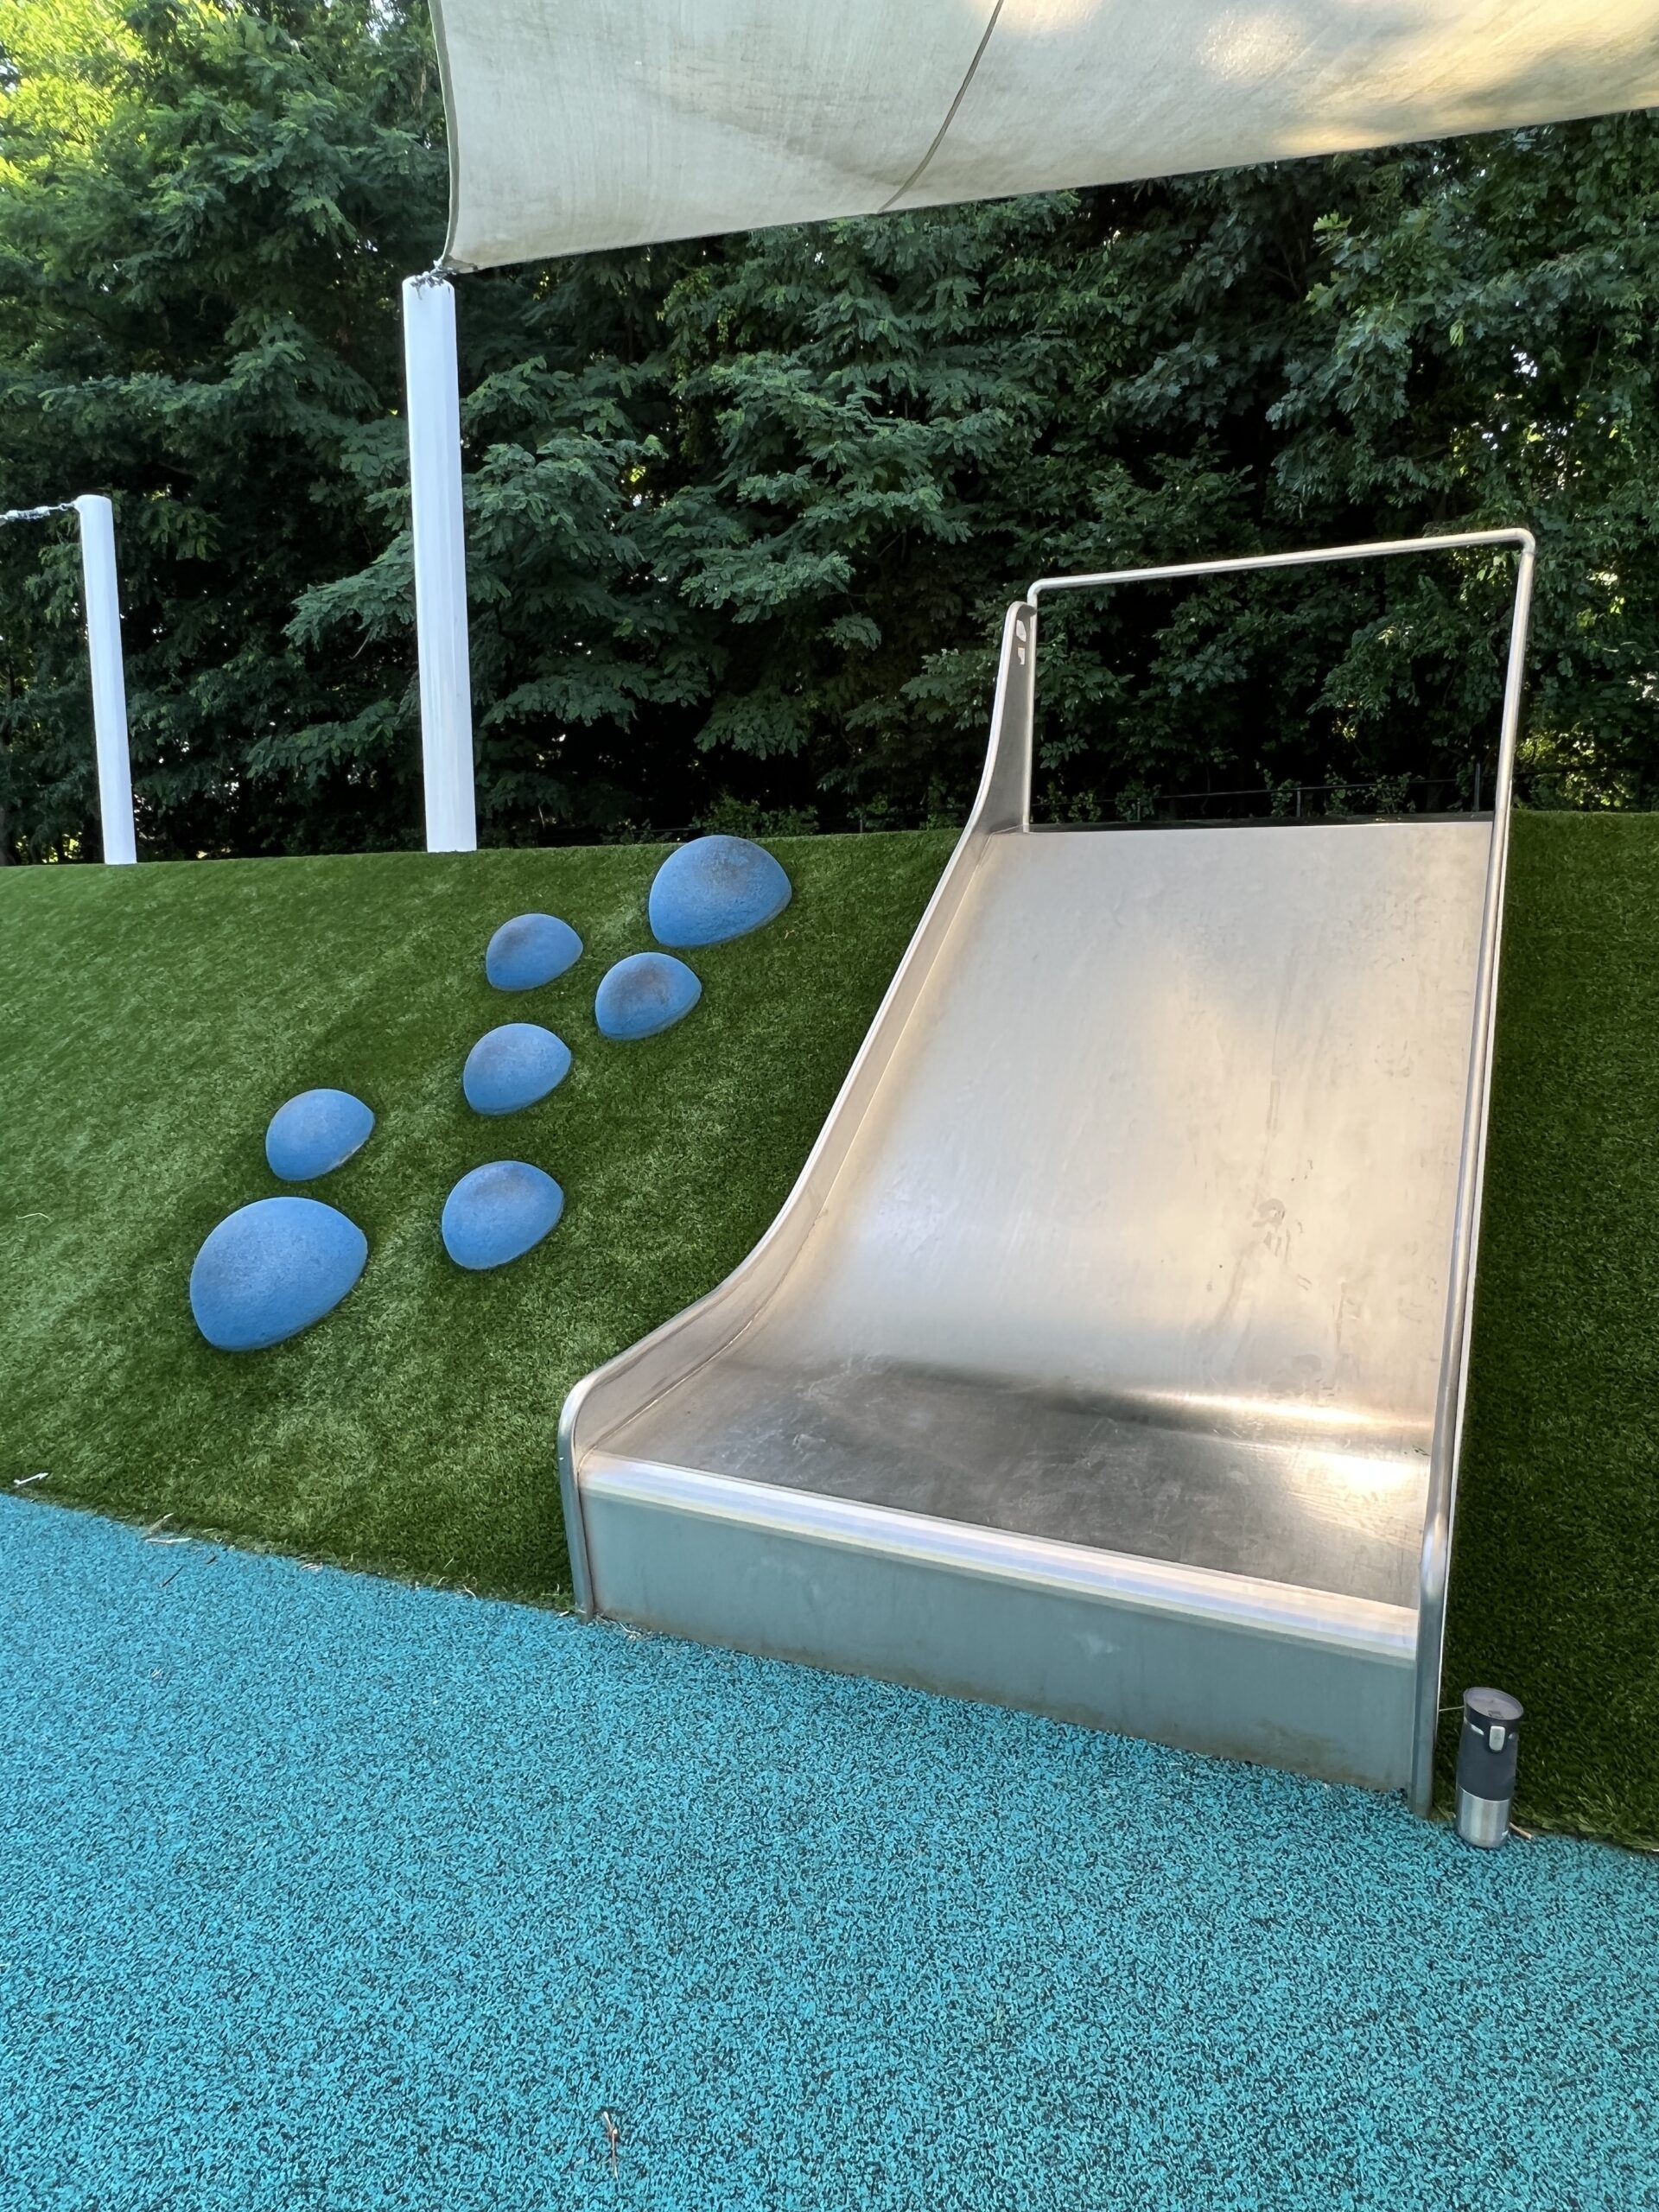 Verona Park Playground in Verona NJ - Features - Hill wall WIDE straight SLIDE with blue climbing spheres TALL image